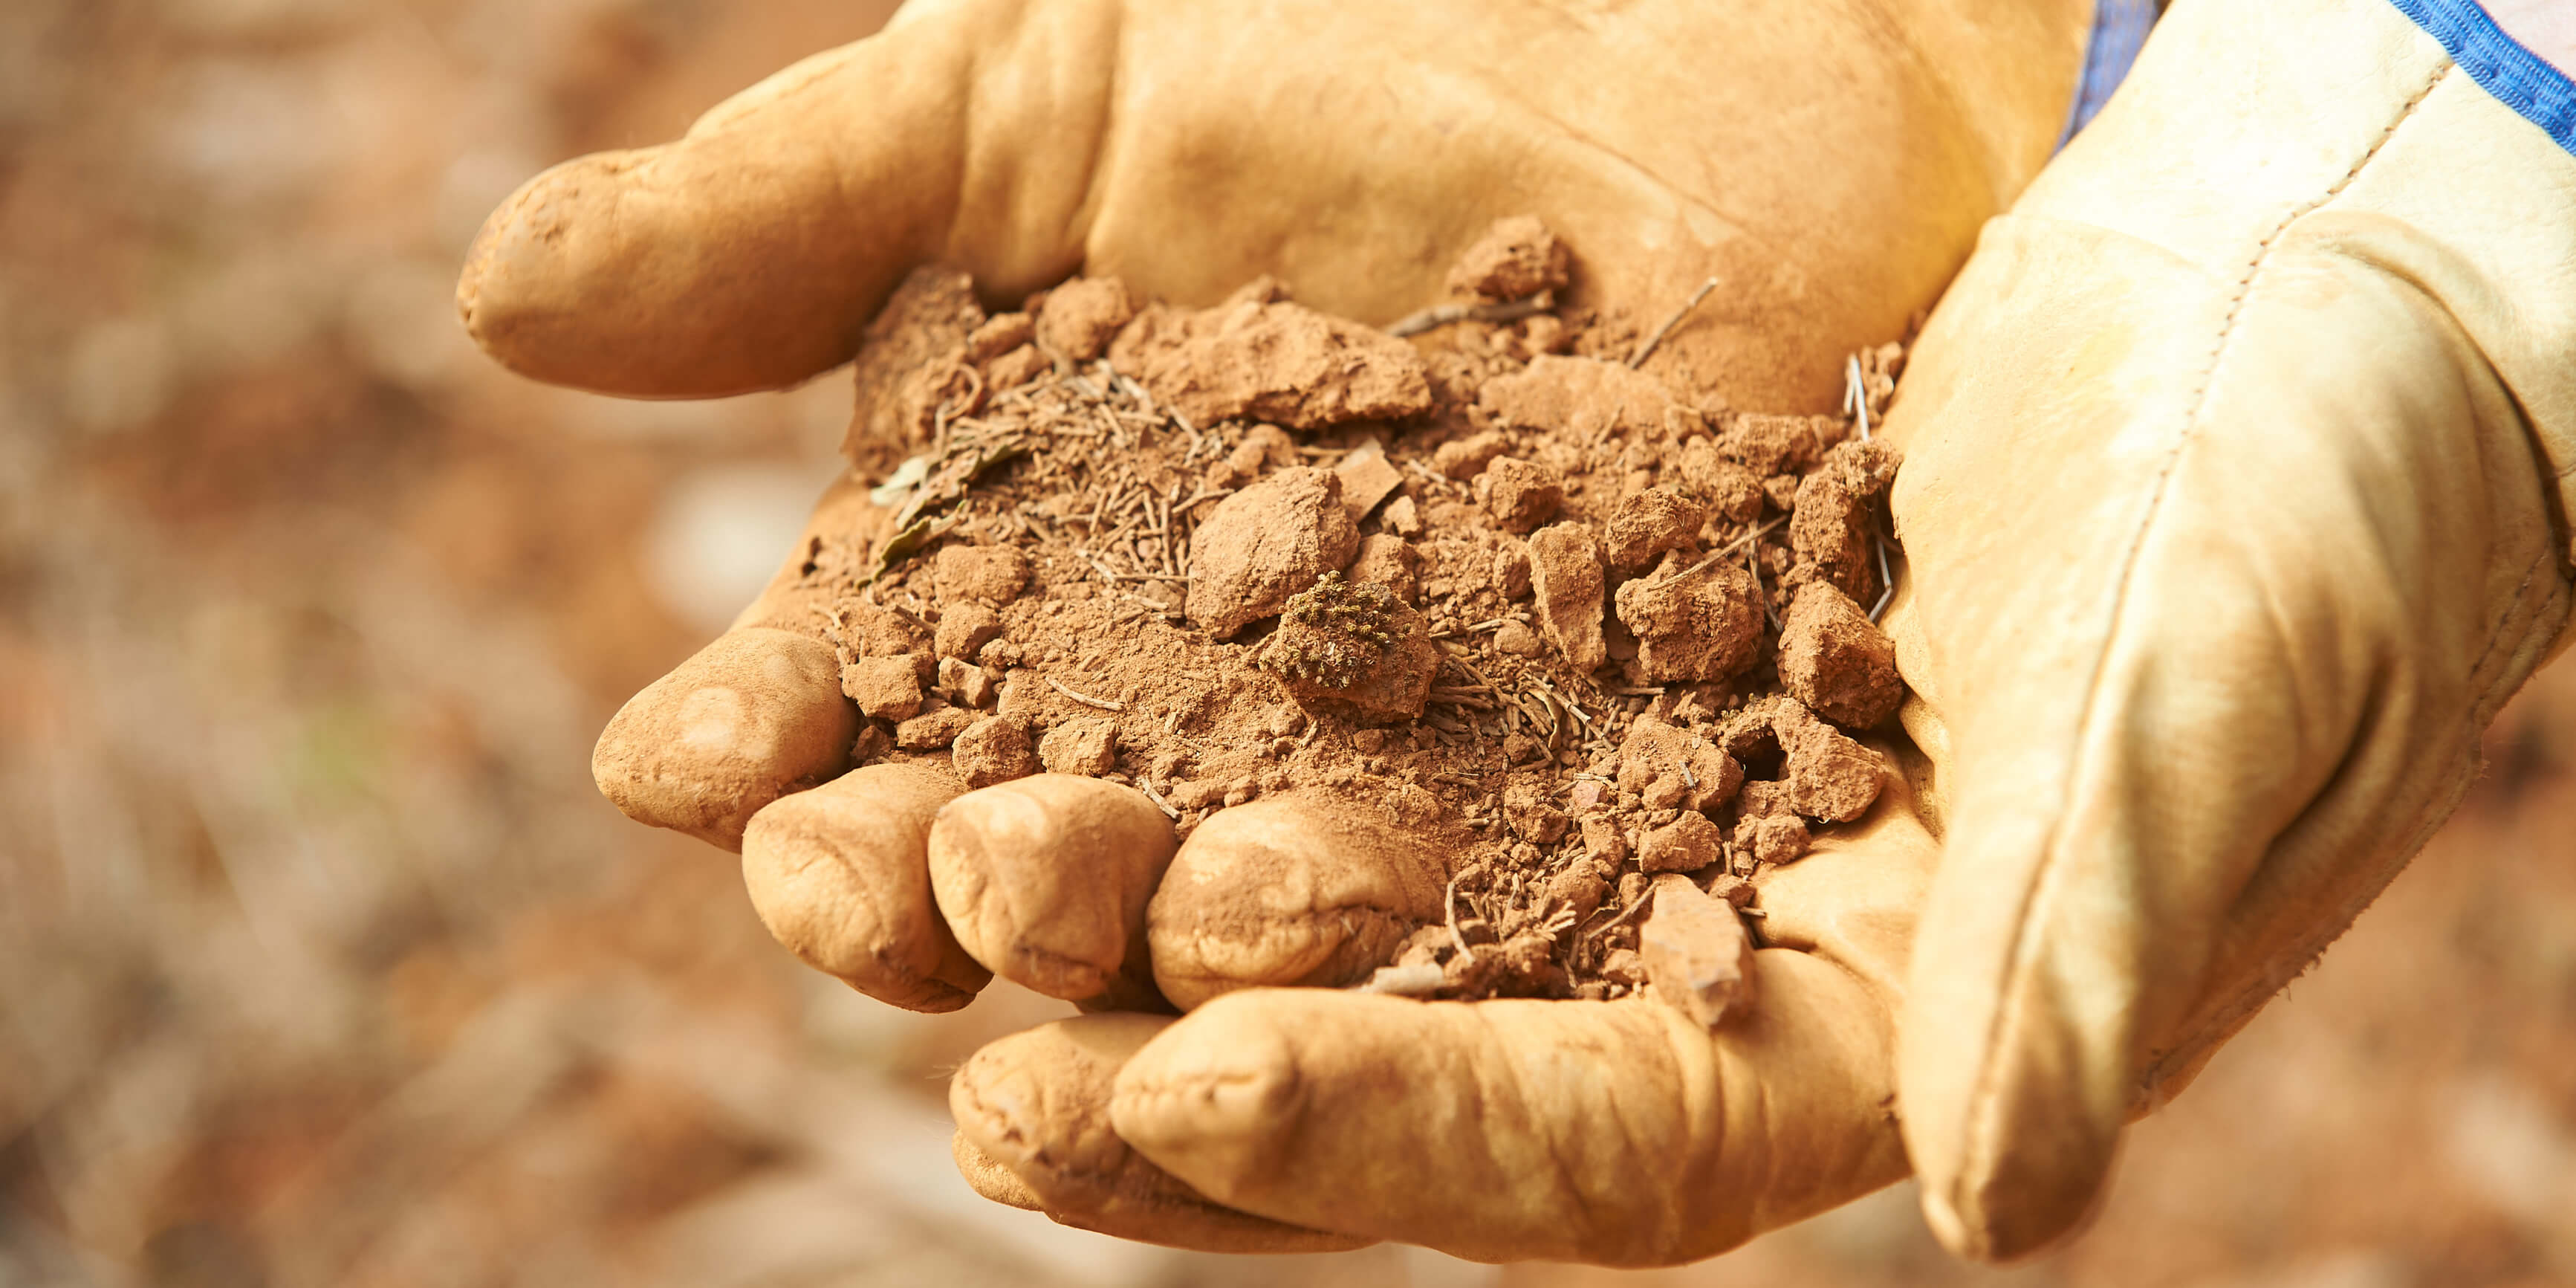 Close up of 2 hands with gloves showing soil